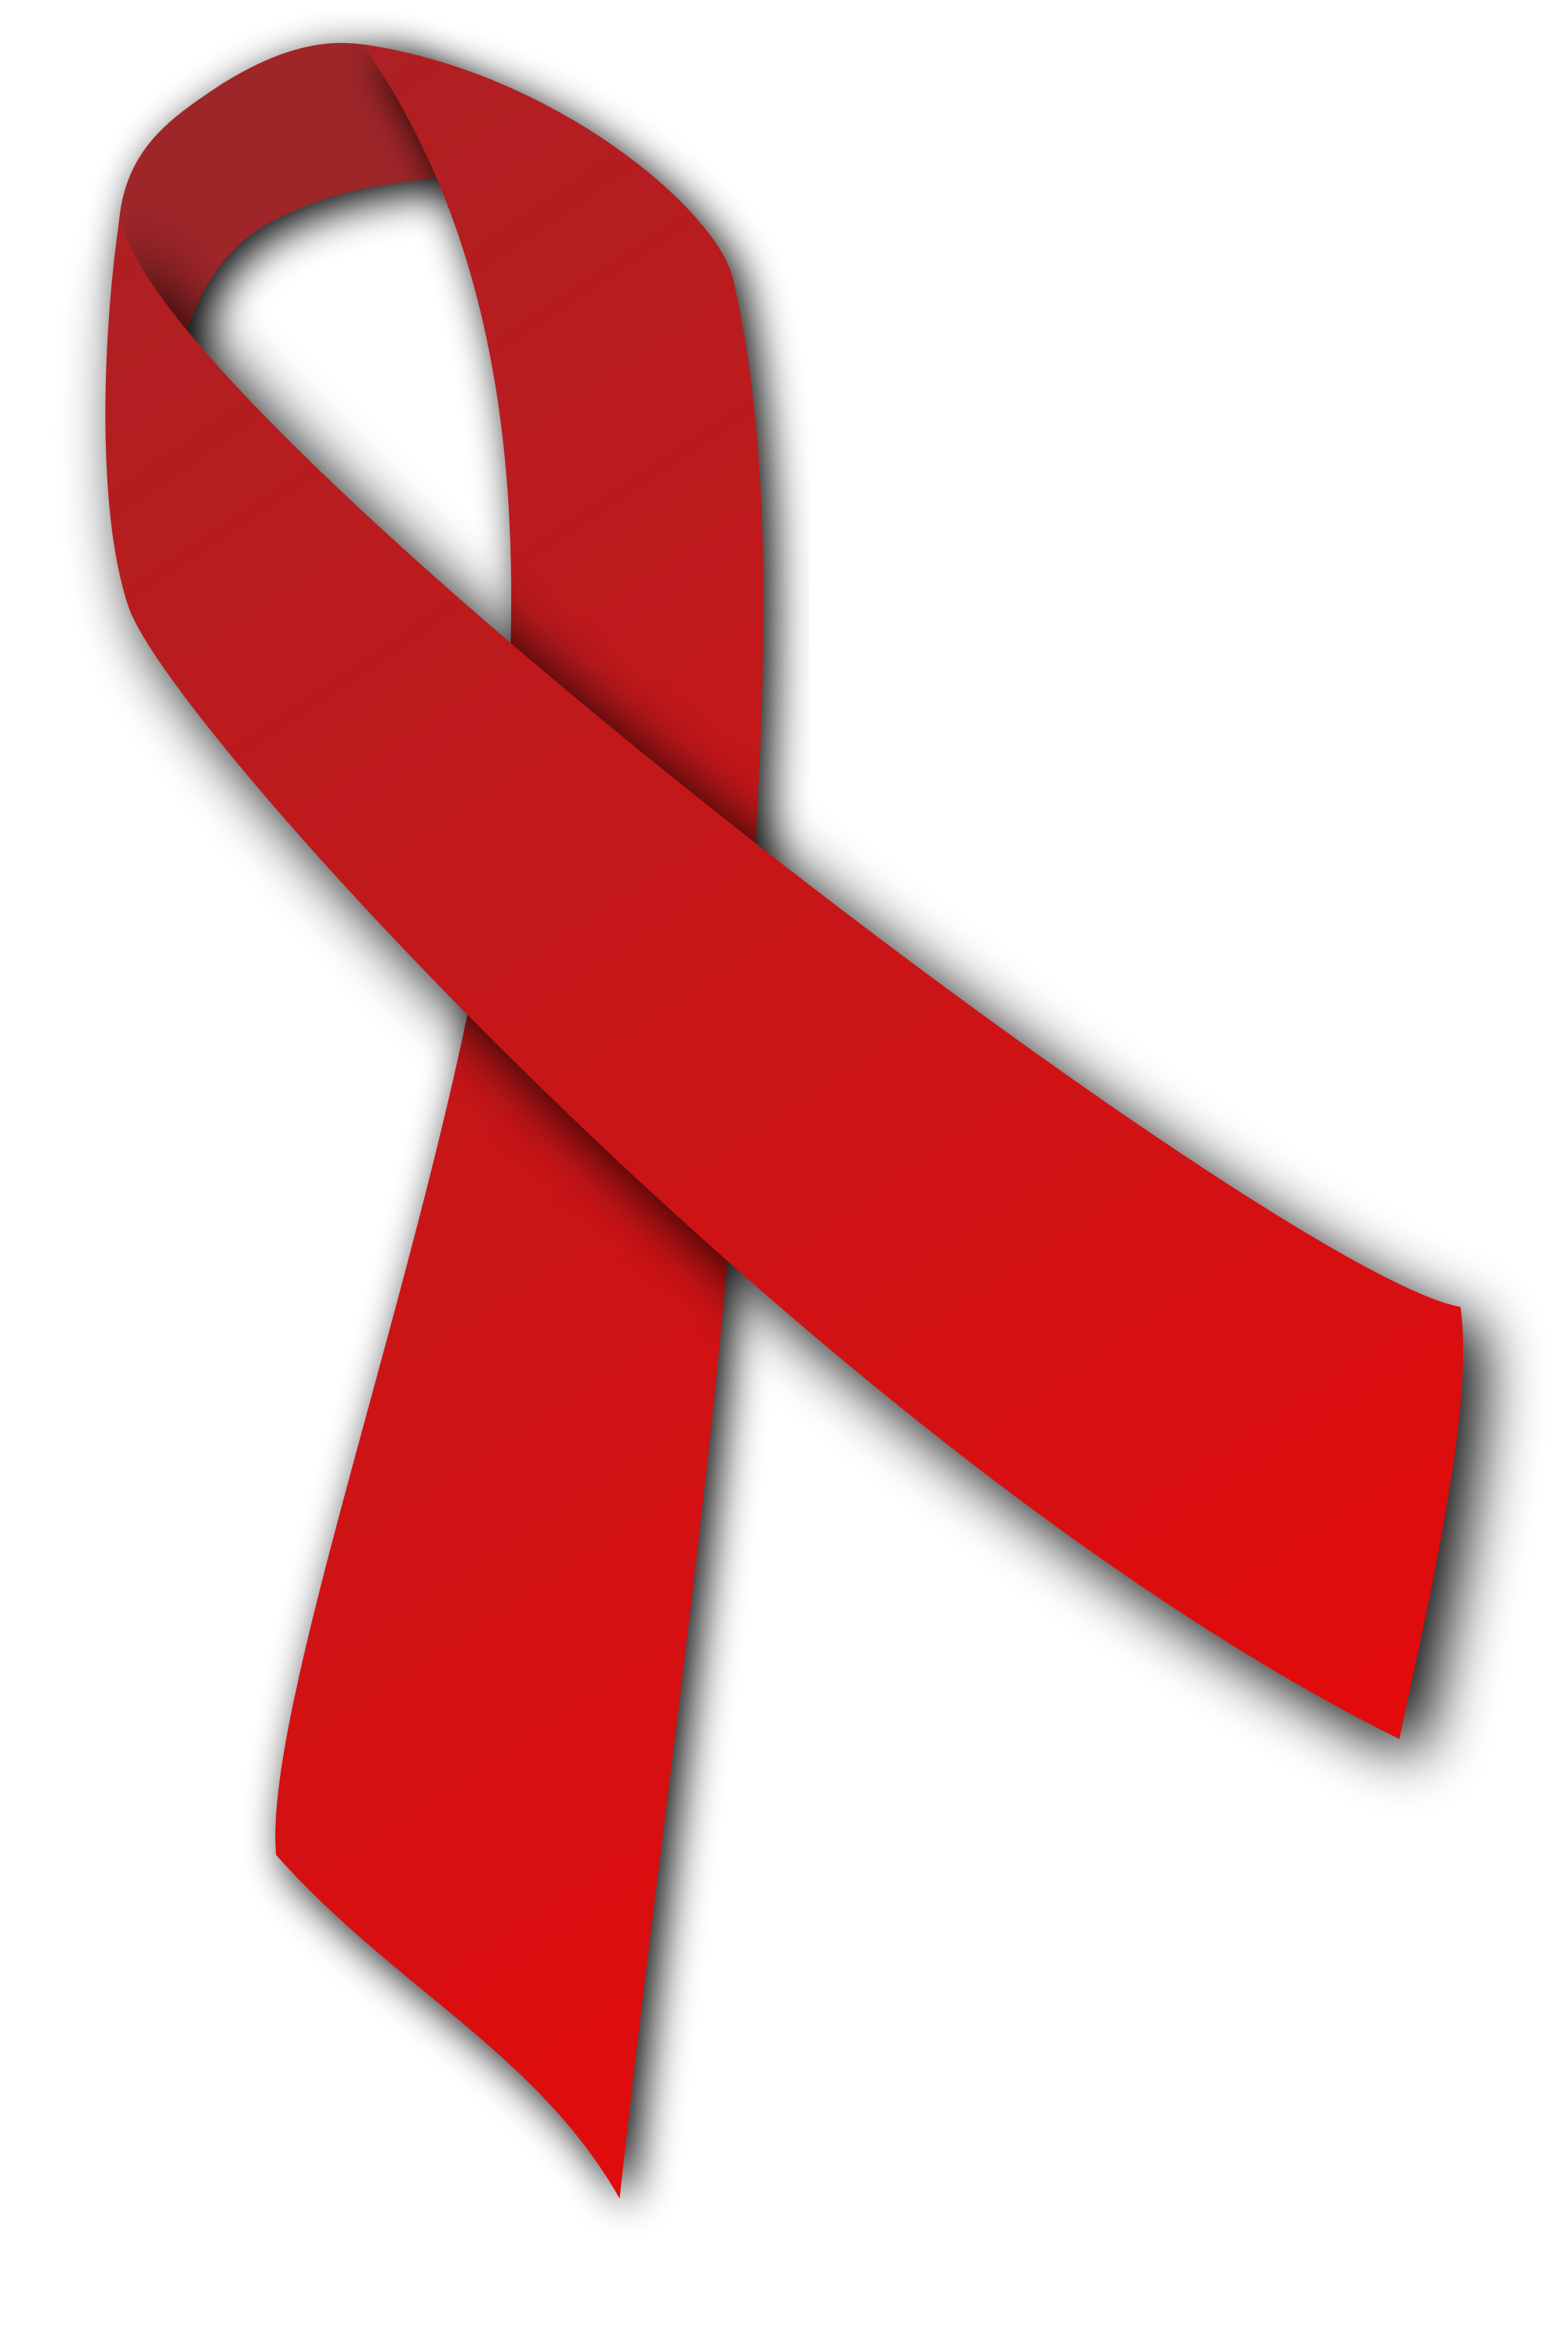 World Aids day awareness red ribbon picture